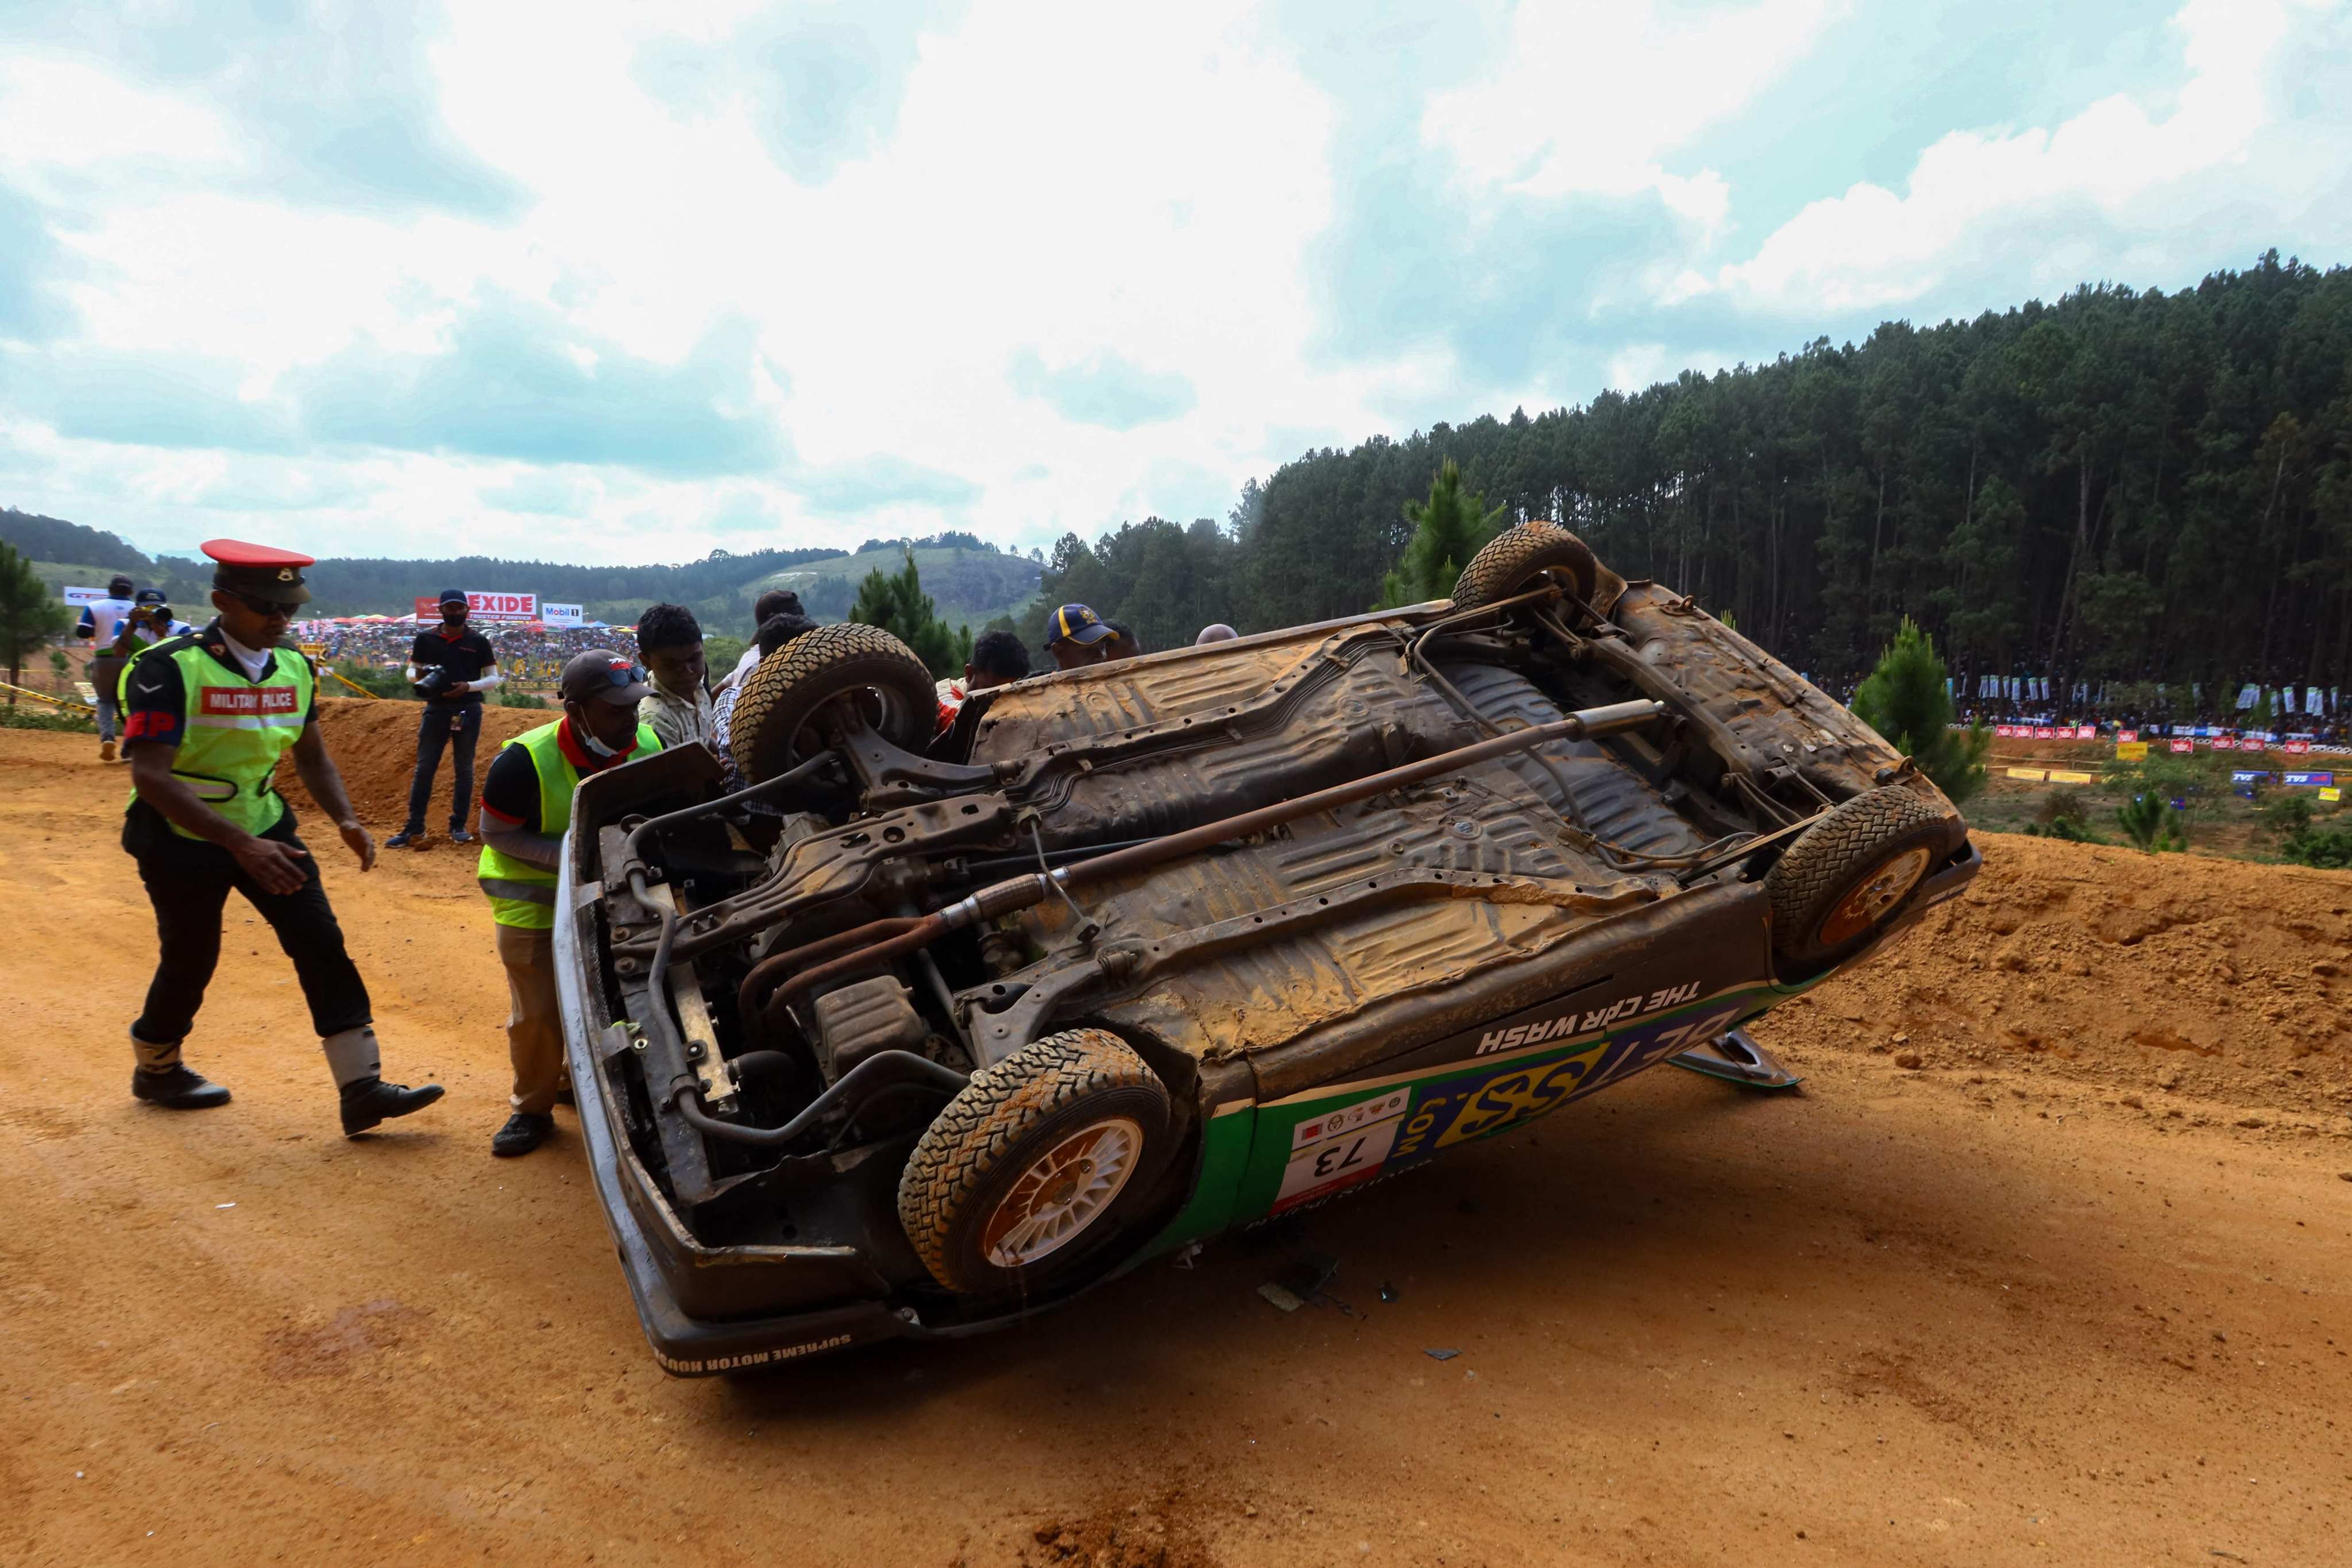 Track attendants inspect a car that came off a racetrack in Diyatalawa, Sri Lanka, on Sunday. Thousands of spectators looked on as the mishap took place. Photo: AFP